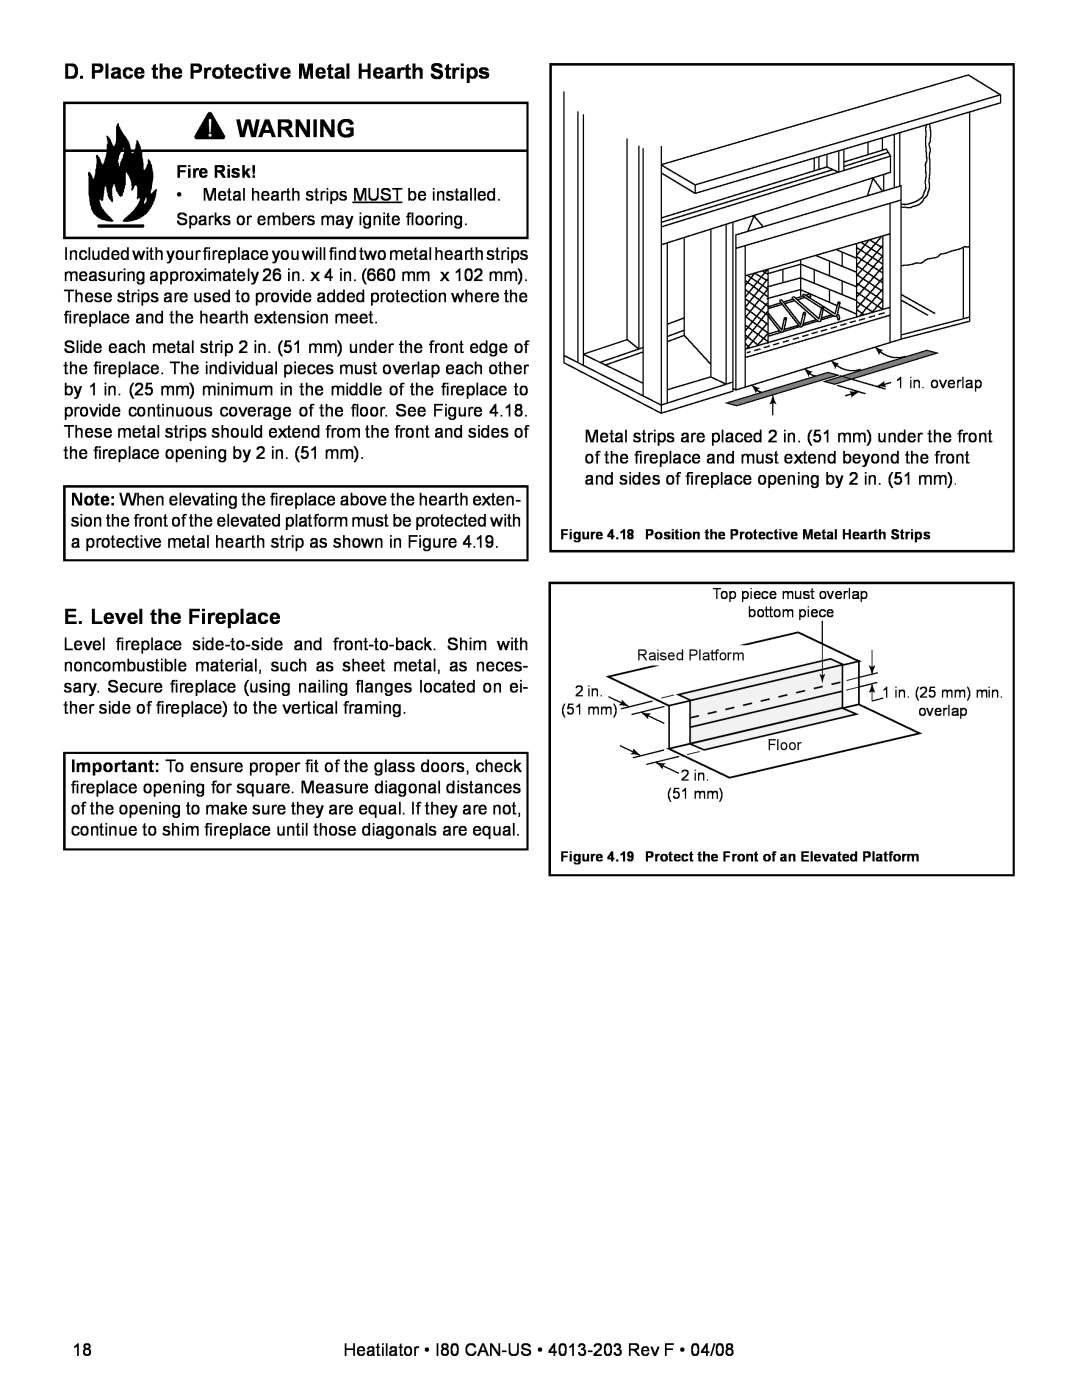 Heatiator I80 owner manual D. Place the Protective Metal Hearth Strips, E. Level the Fireplace, Fire Risk 